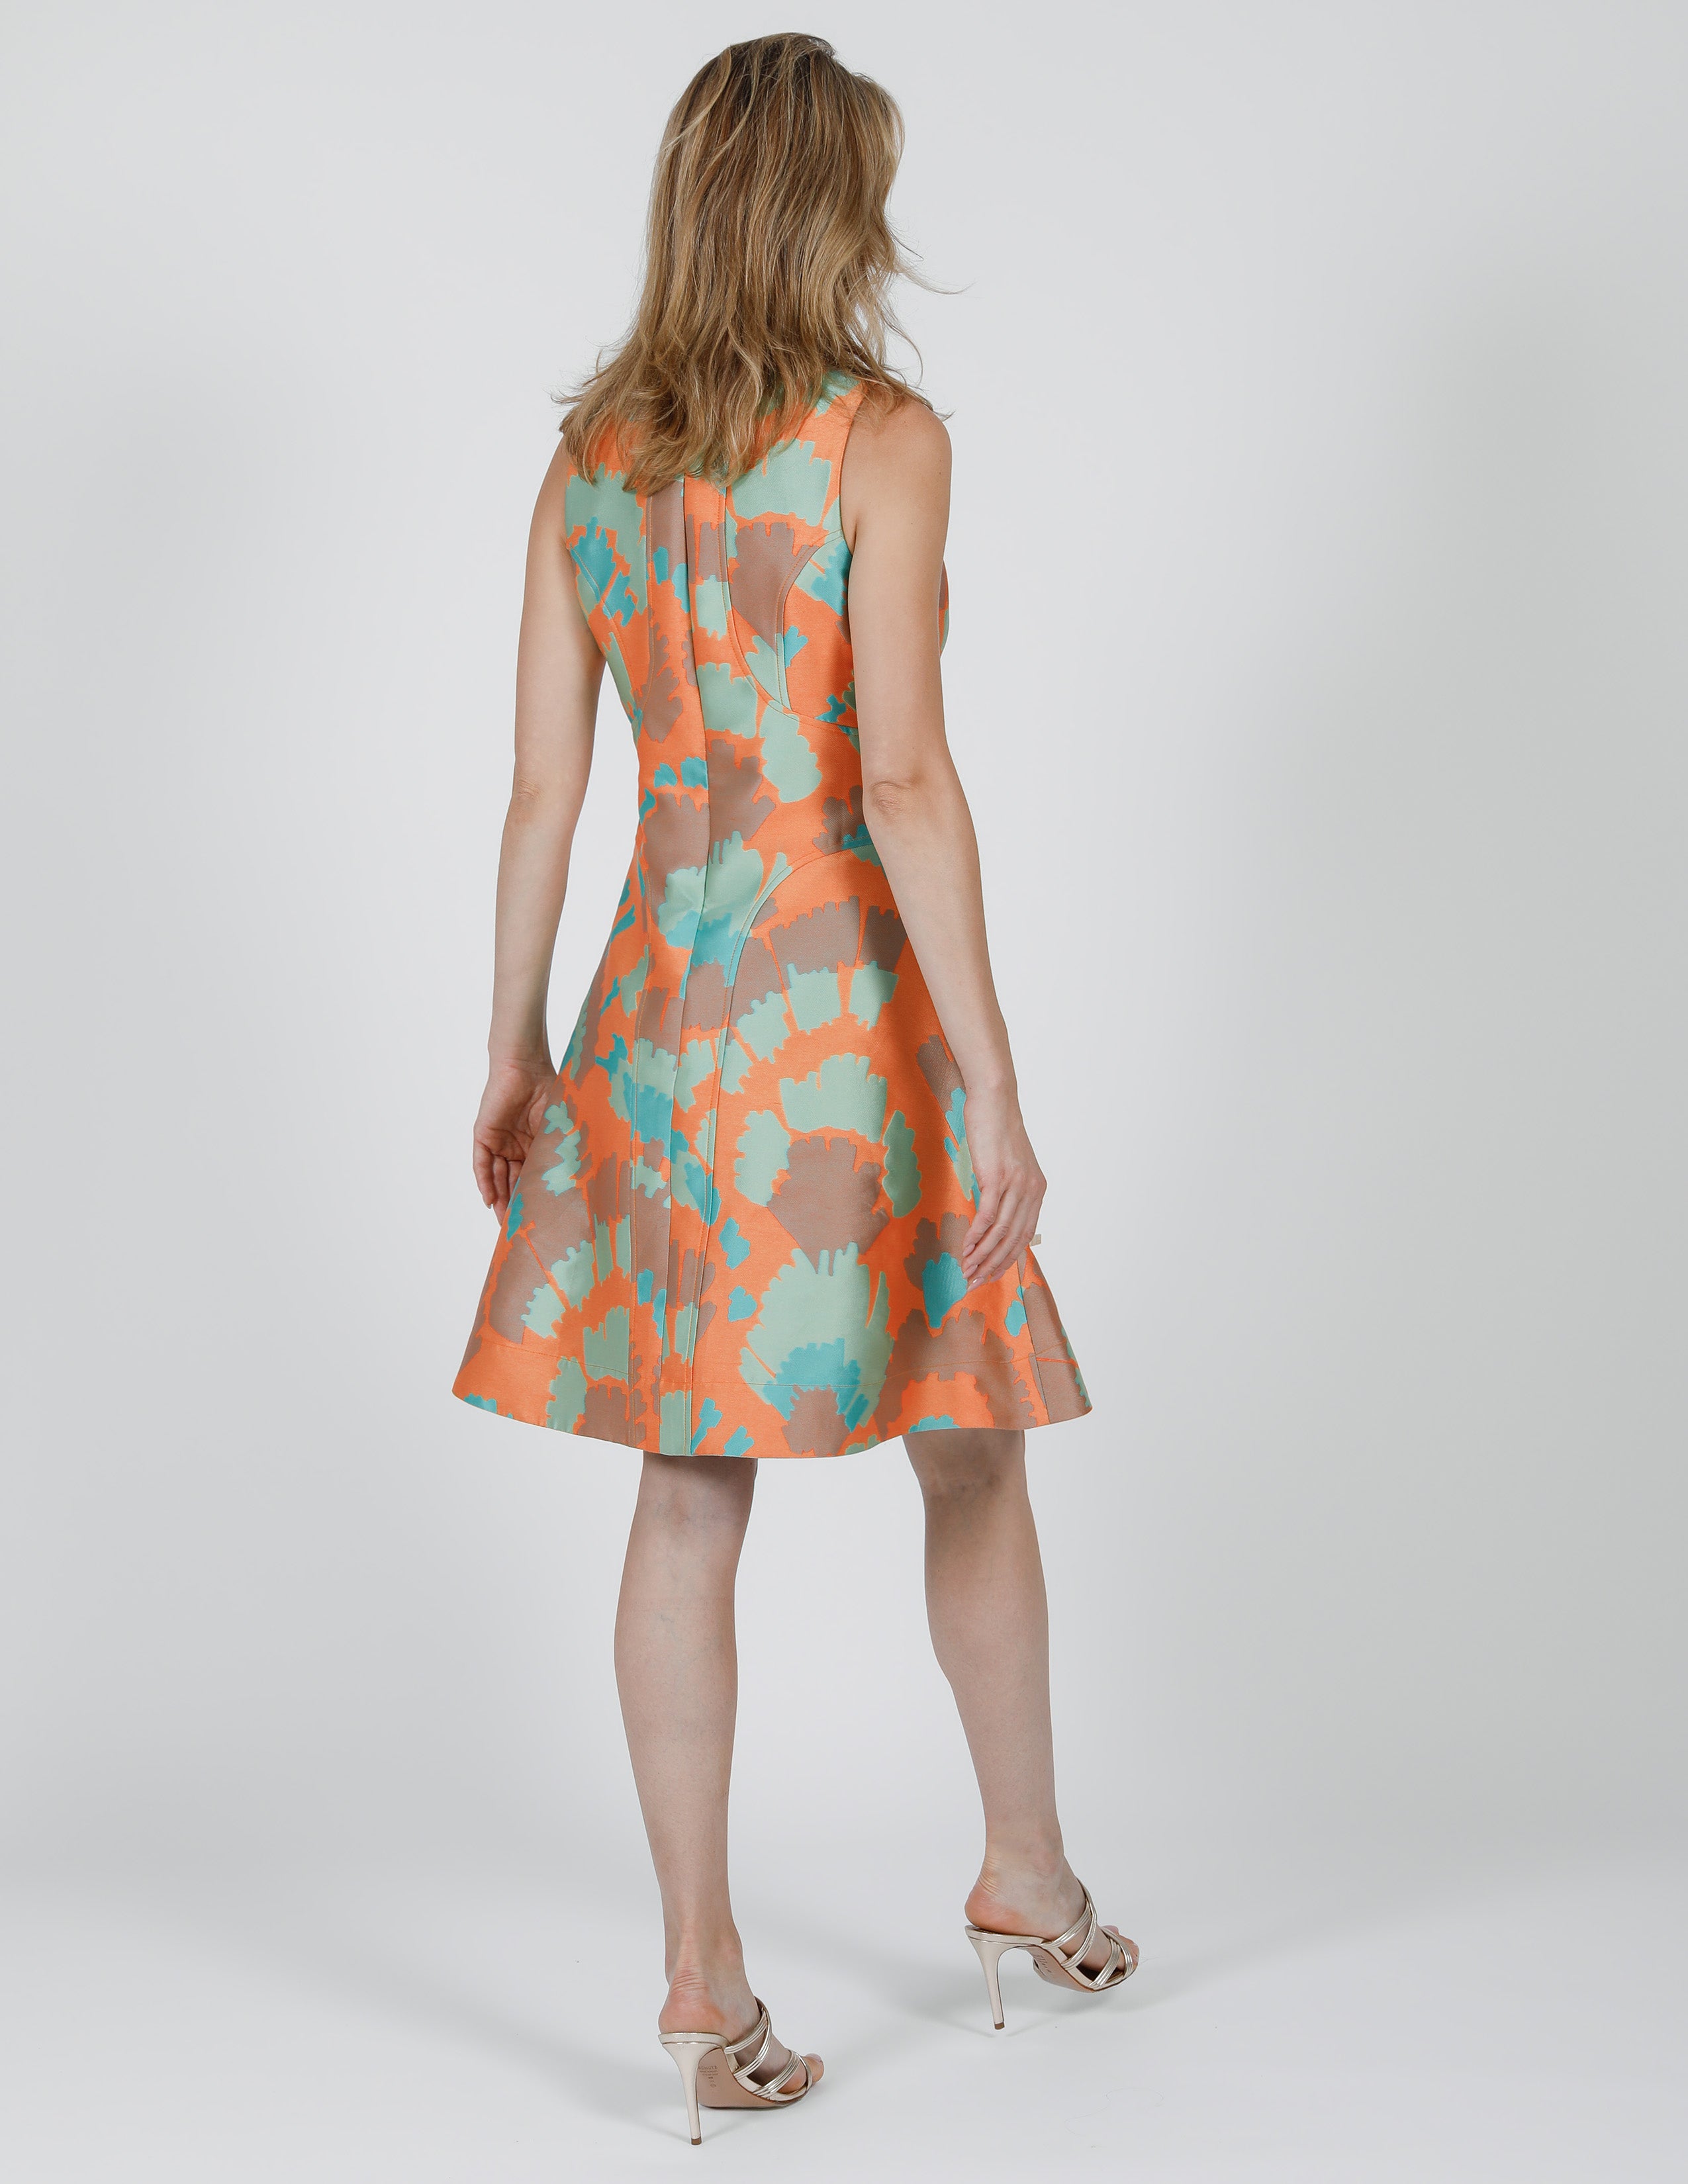 LUXEMBOURG JACQUARD PARTY DRESS - SHIPS 3.31